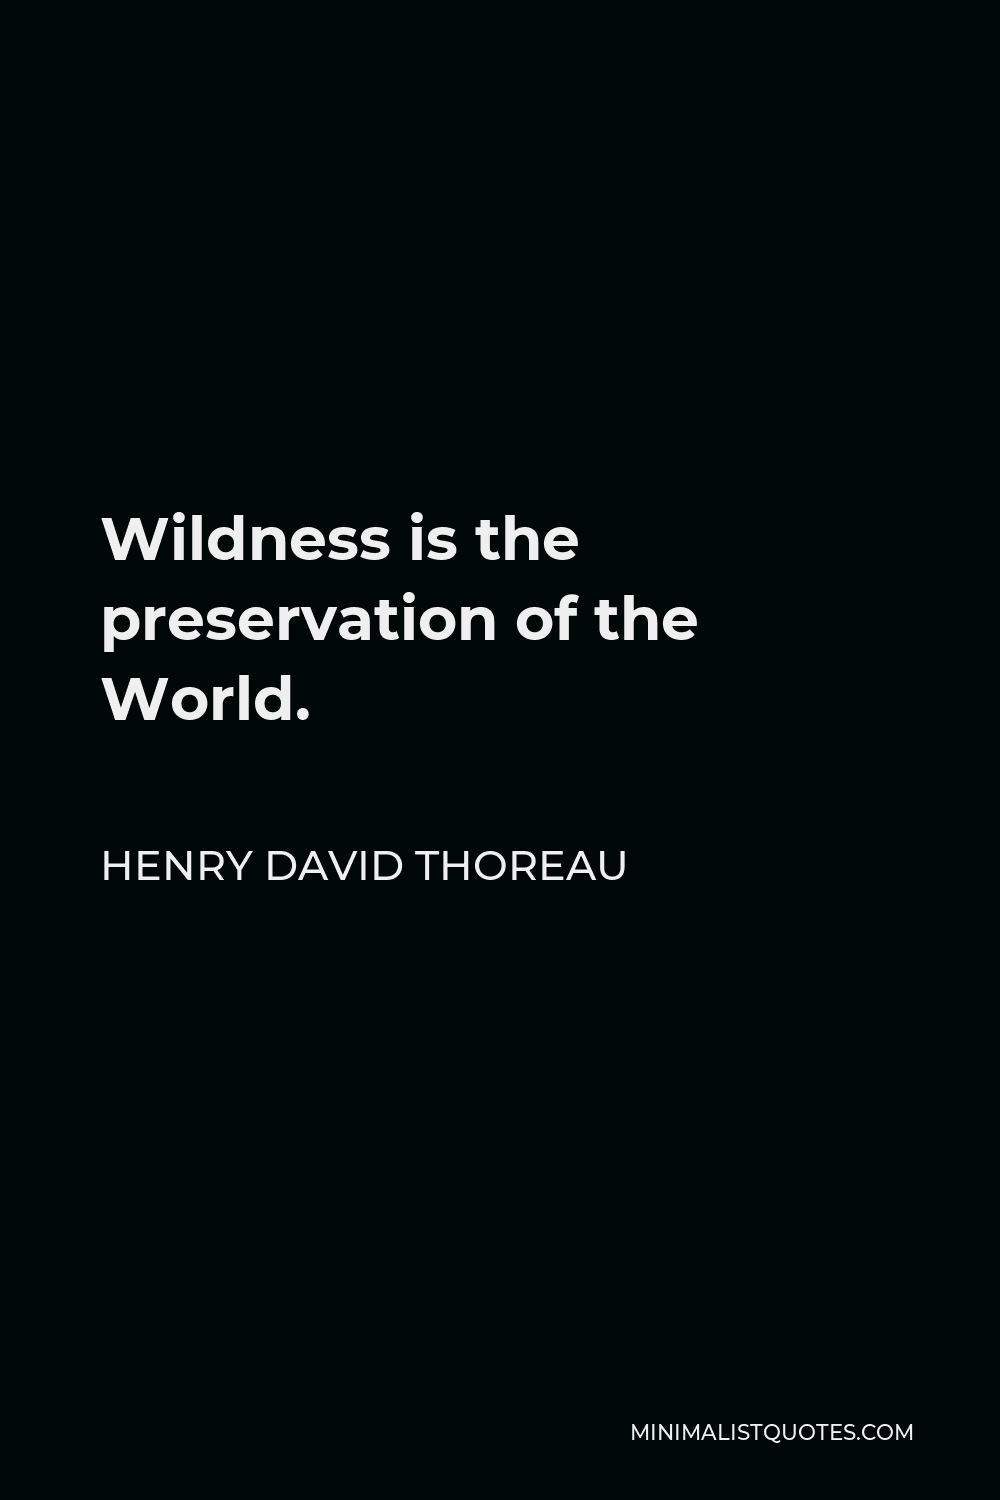 Henry David Thoreau Quote - Wildness is the preservation of the World.